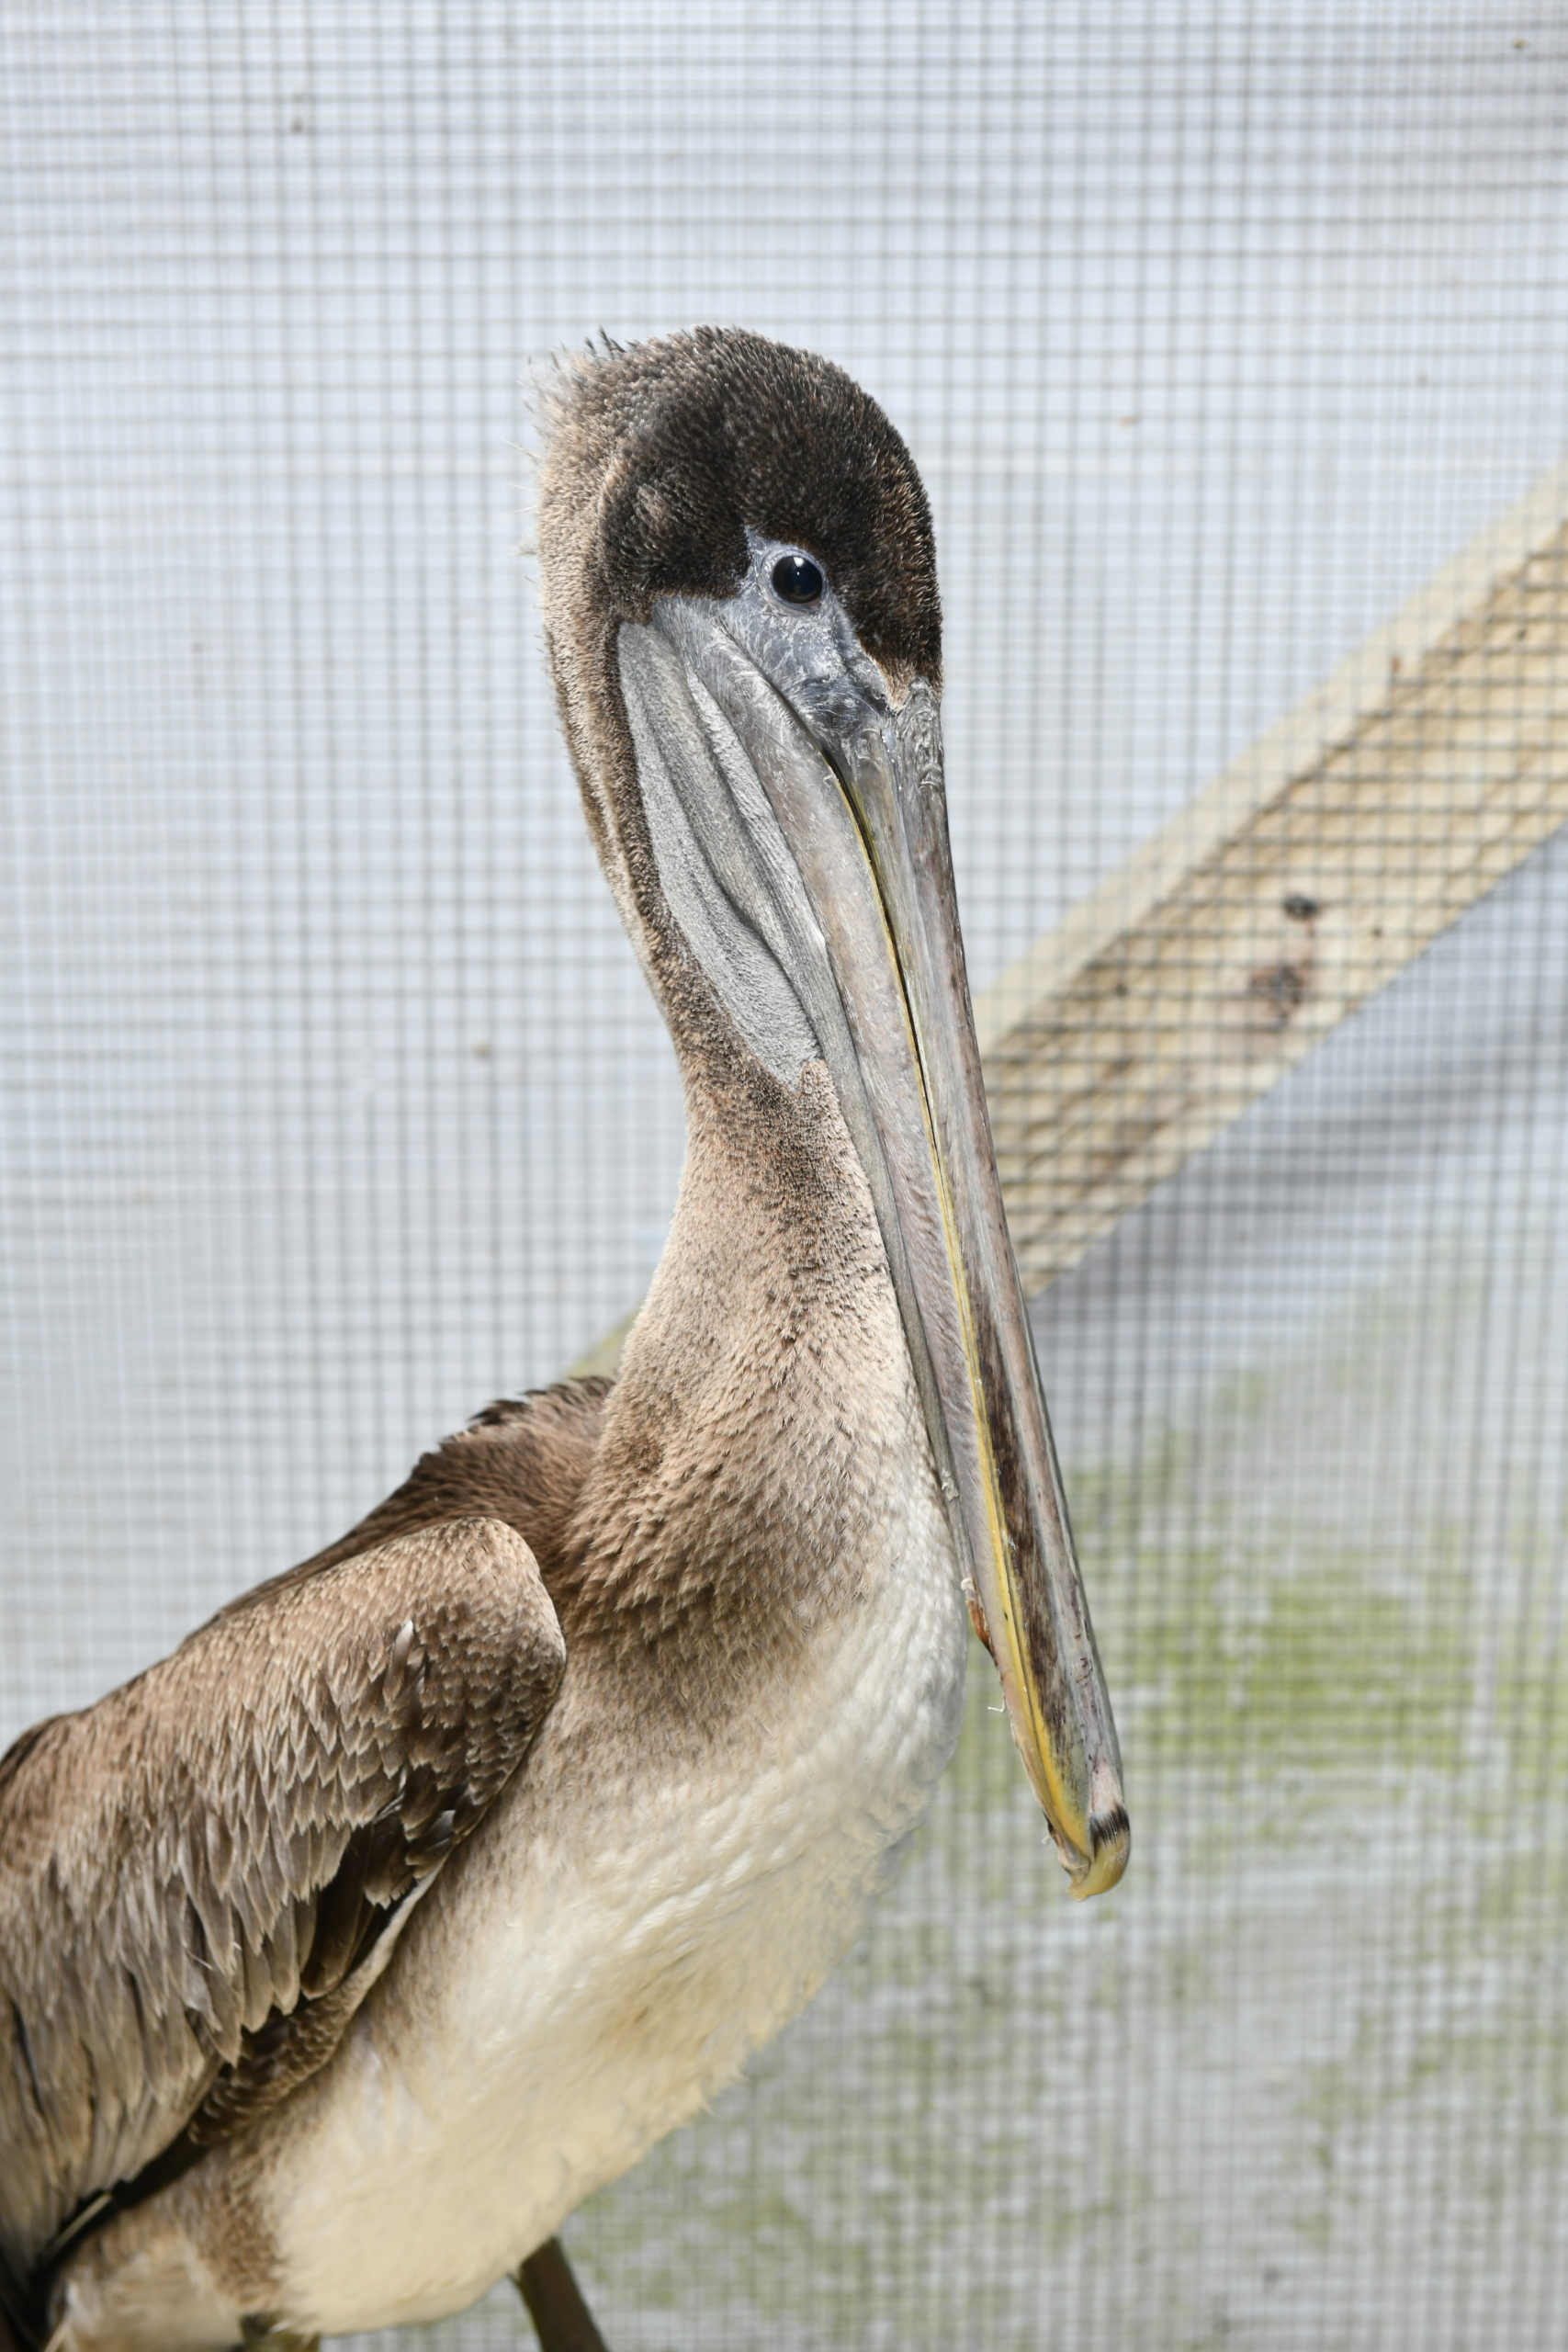 One of the brown pelicans that were rescued in Montauk recuperates at the Evelyn Alexander Wildlife Rescue Center in Hampton Bays on Thursday. DANA SHAW